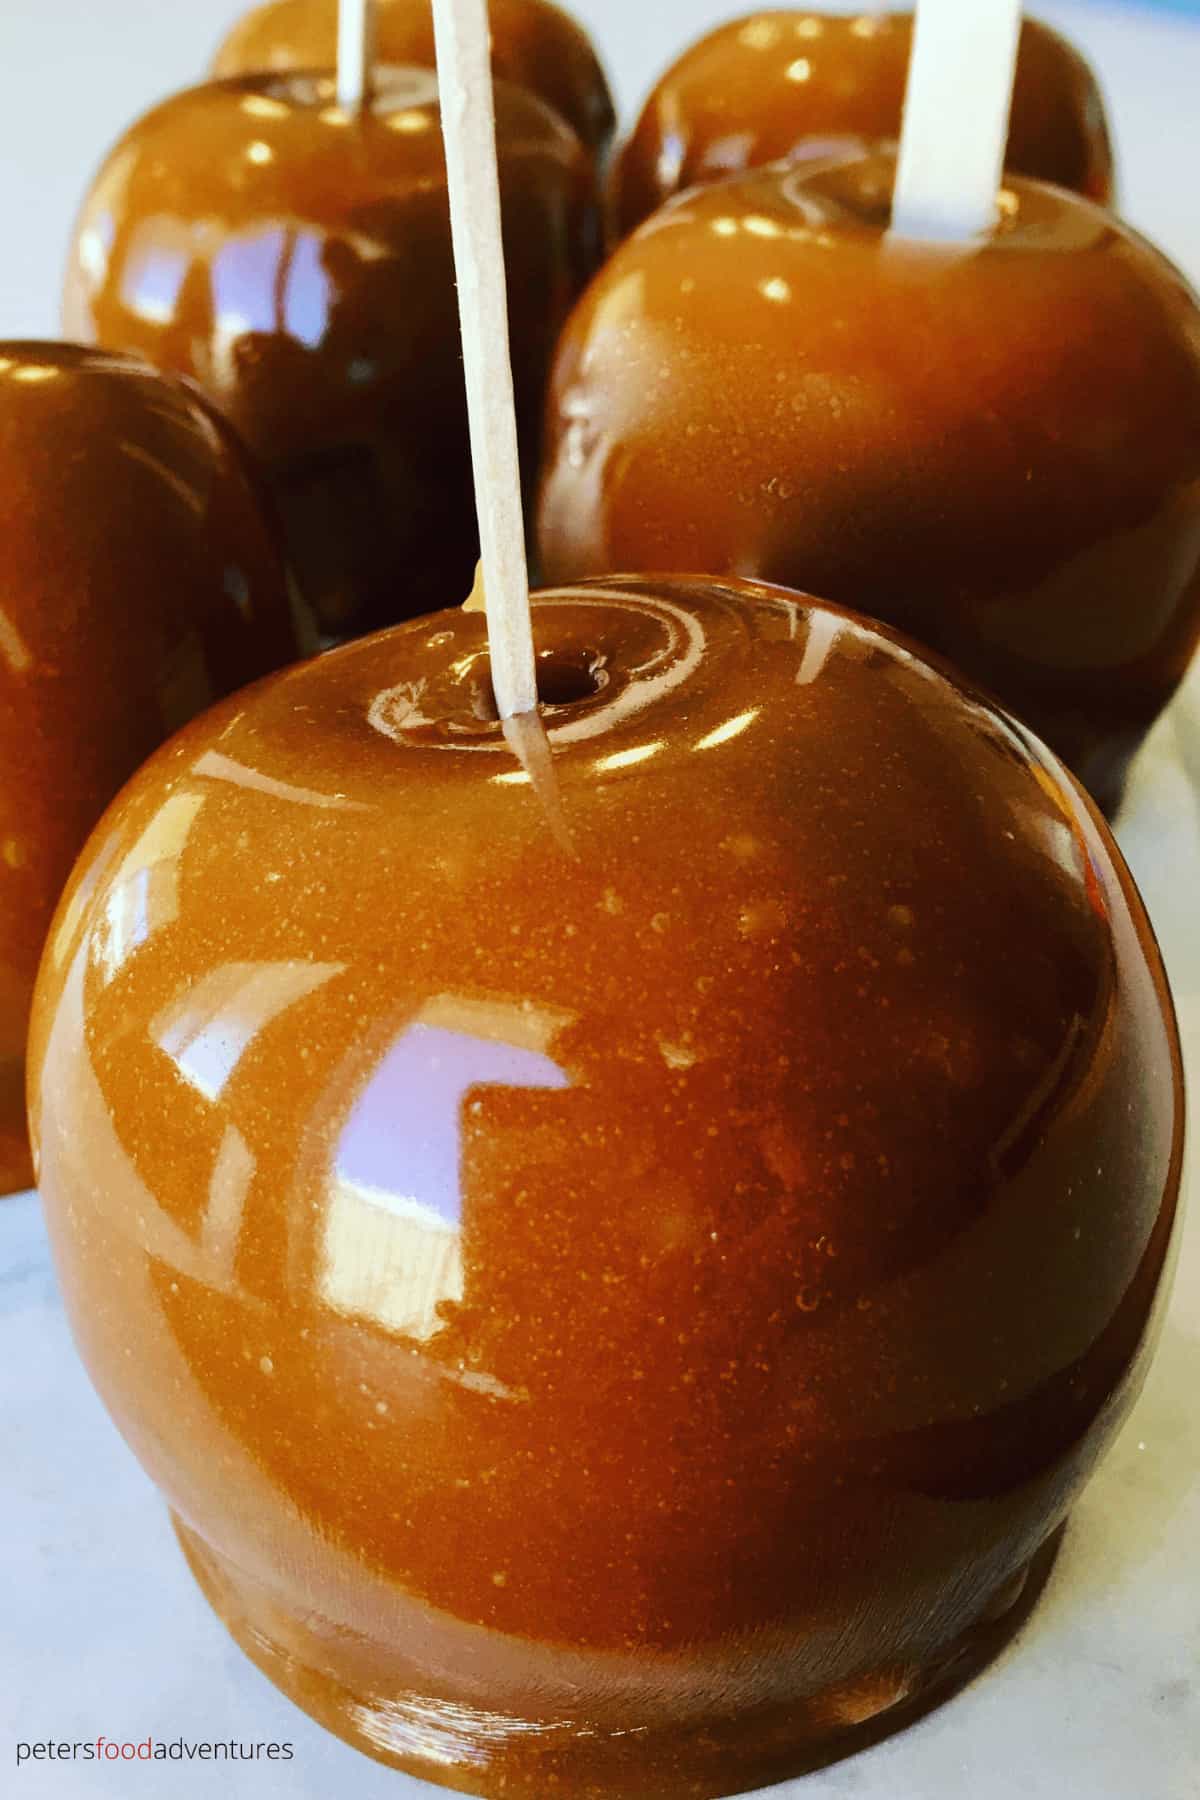 Caramel Apples are a family autumn favorite, perfect for halloween and parties. An easy fall classic the whole family will love - Kraft Caramel Apples